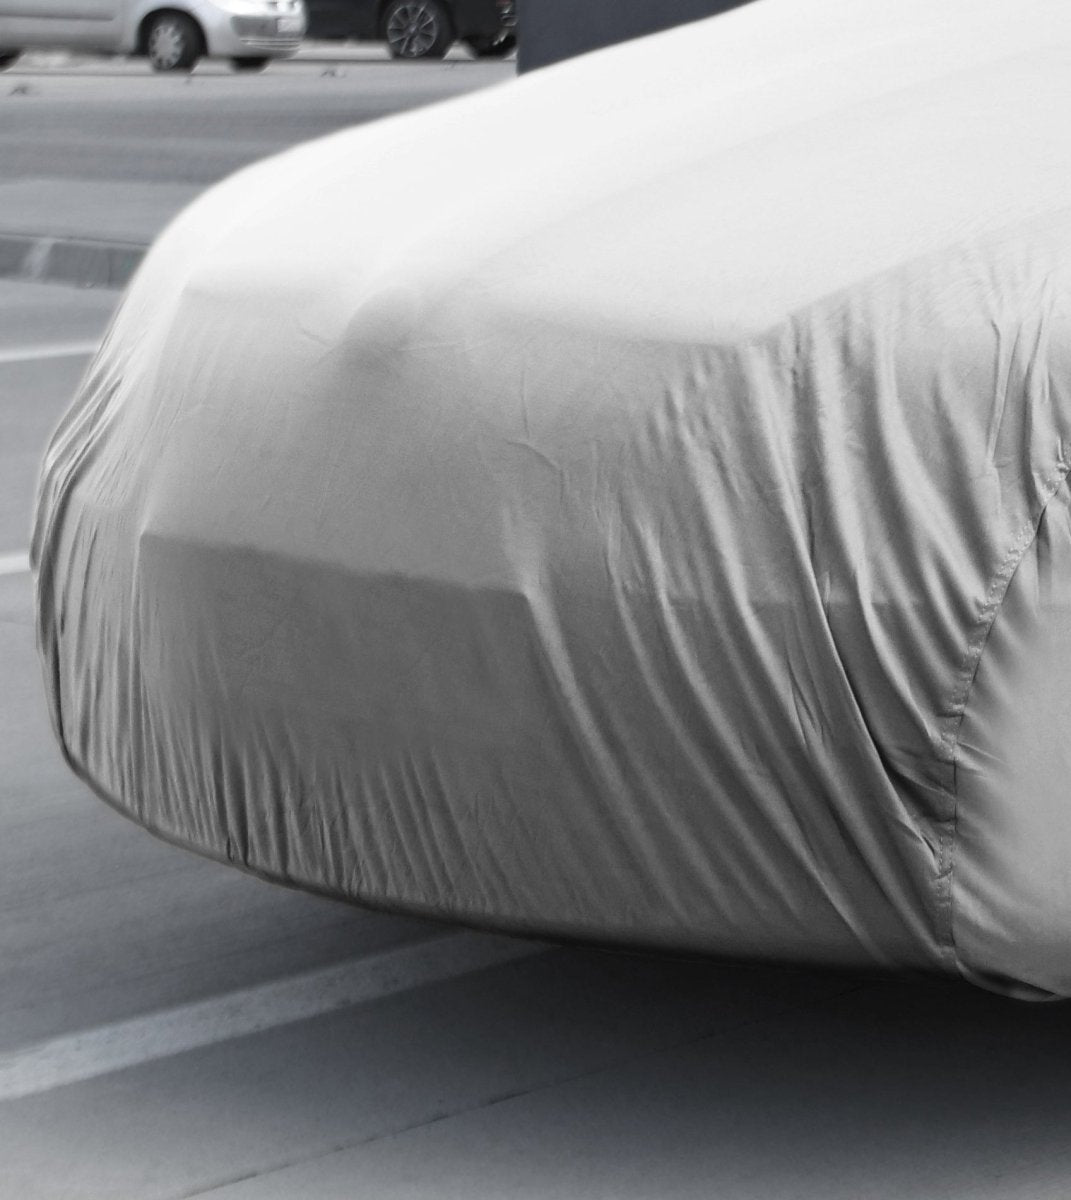 Outdoor Dust & Waterproof Car Cover - Green Flag Shop